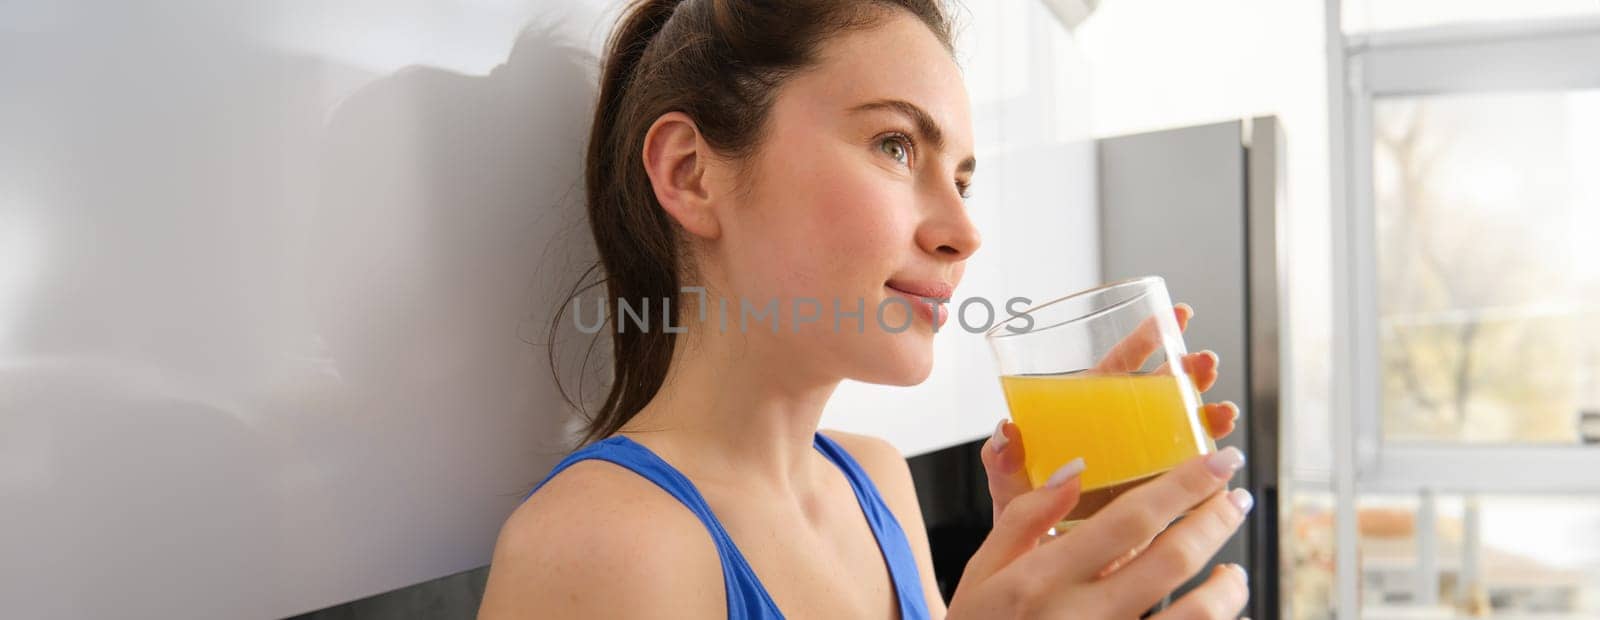 Close up portrait of beautiful young woman, looking away, drinking orange juice, fresh in glass, standing in kitchen, wearing workout clothes.